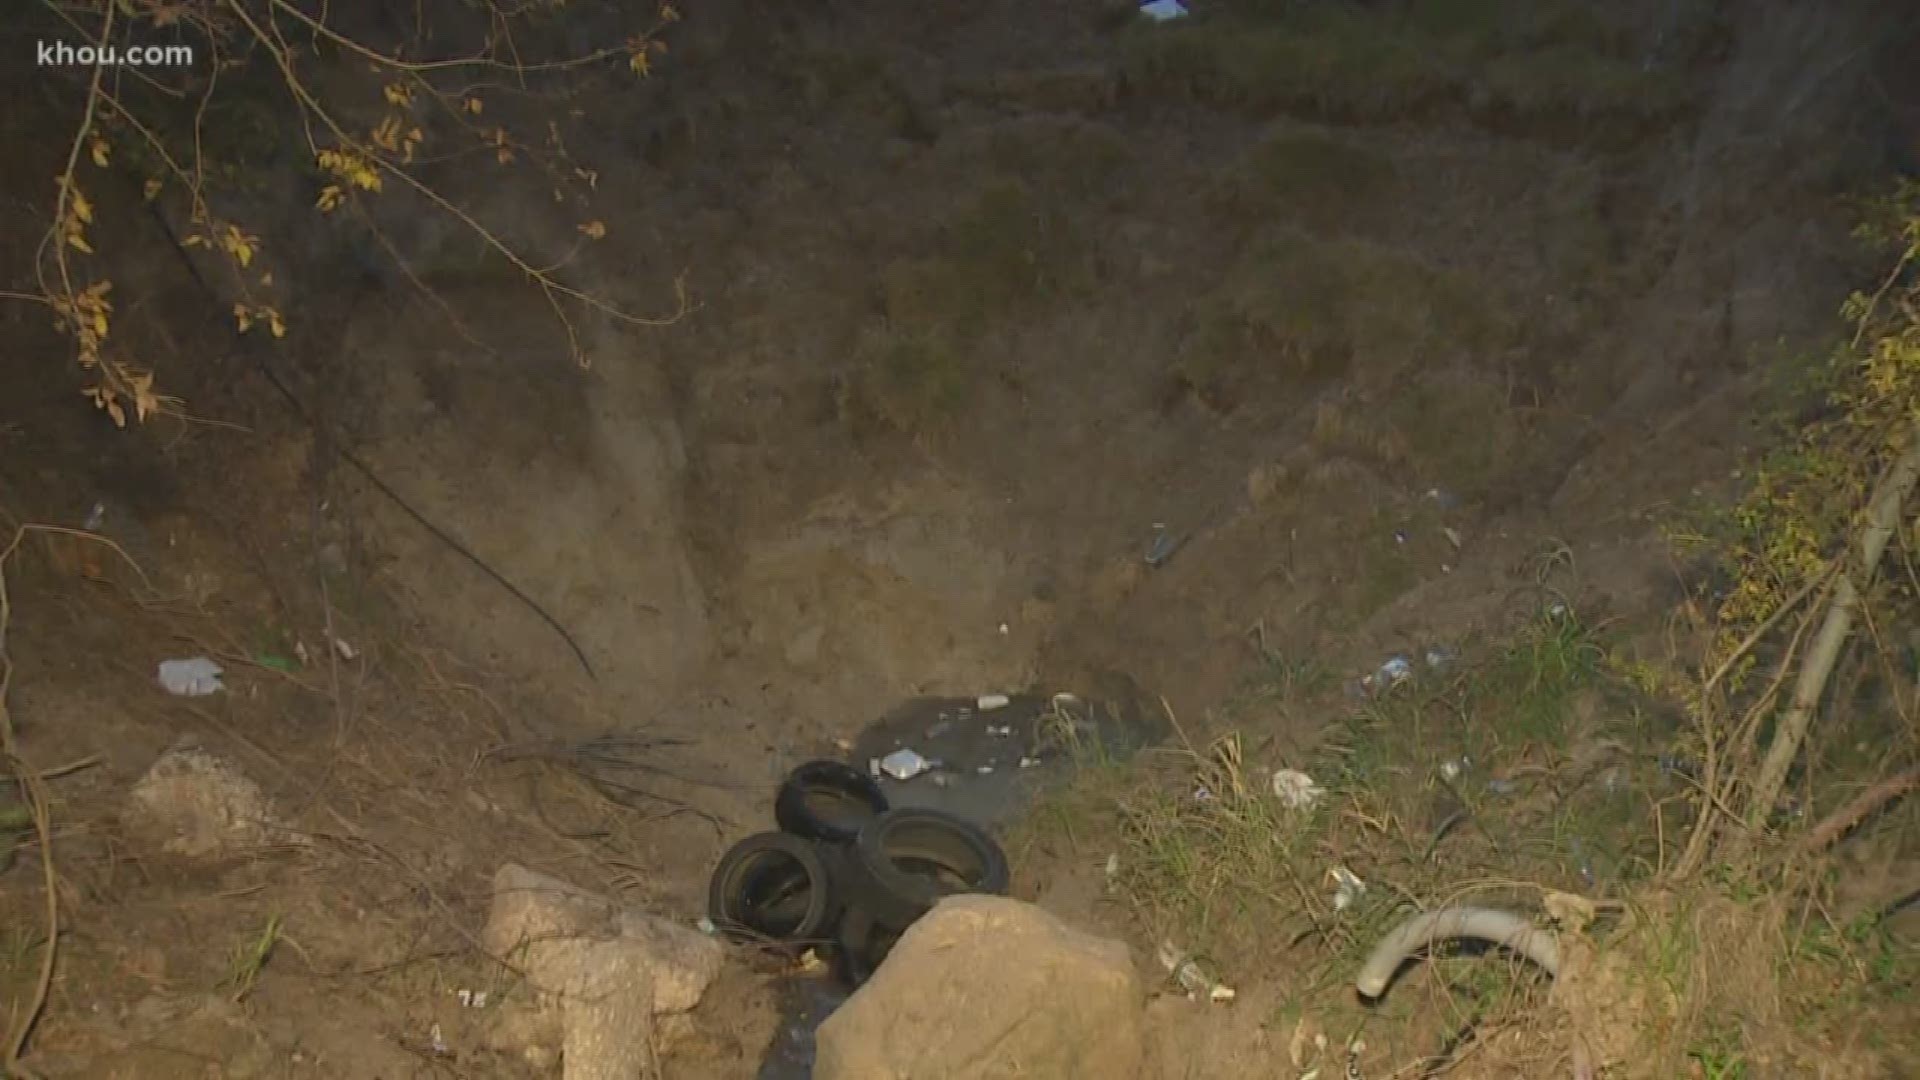 A giant sinkhole has opened up in east Houston and it's threatening a family's home.